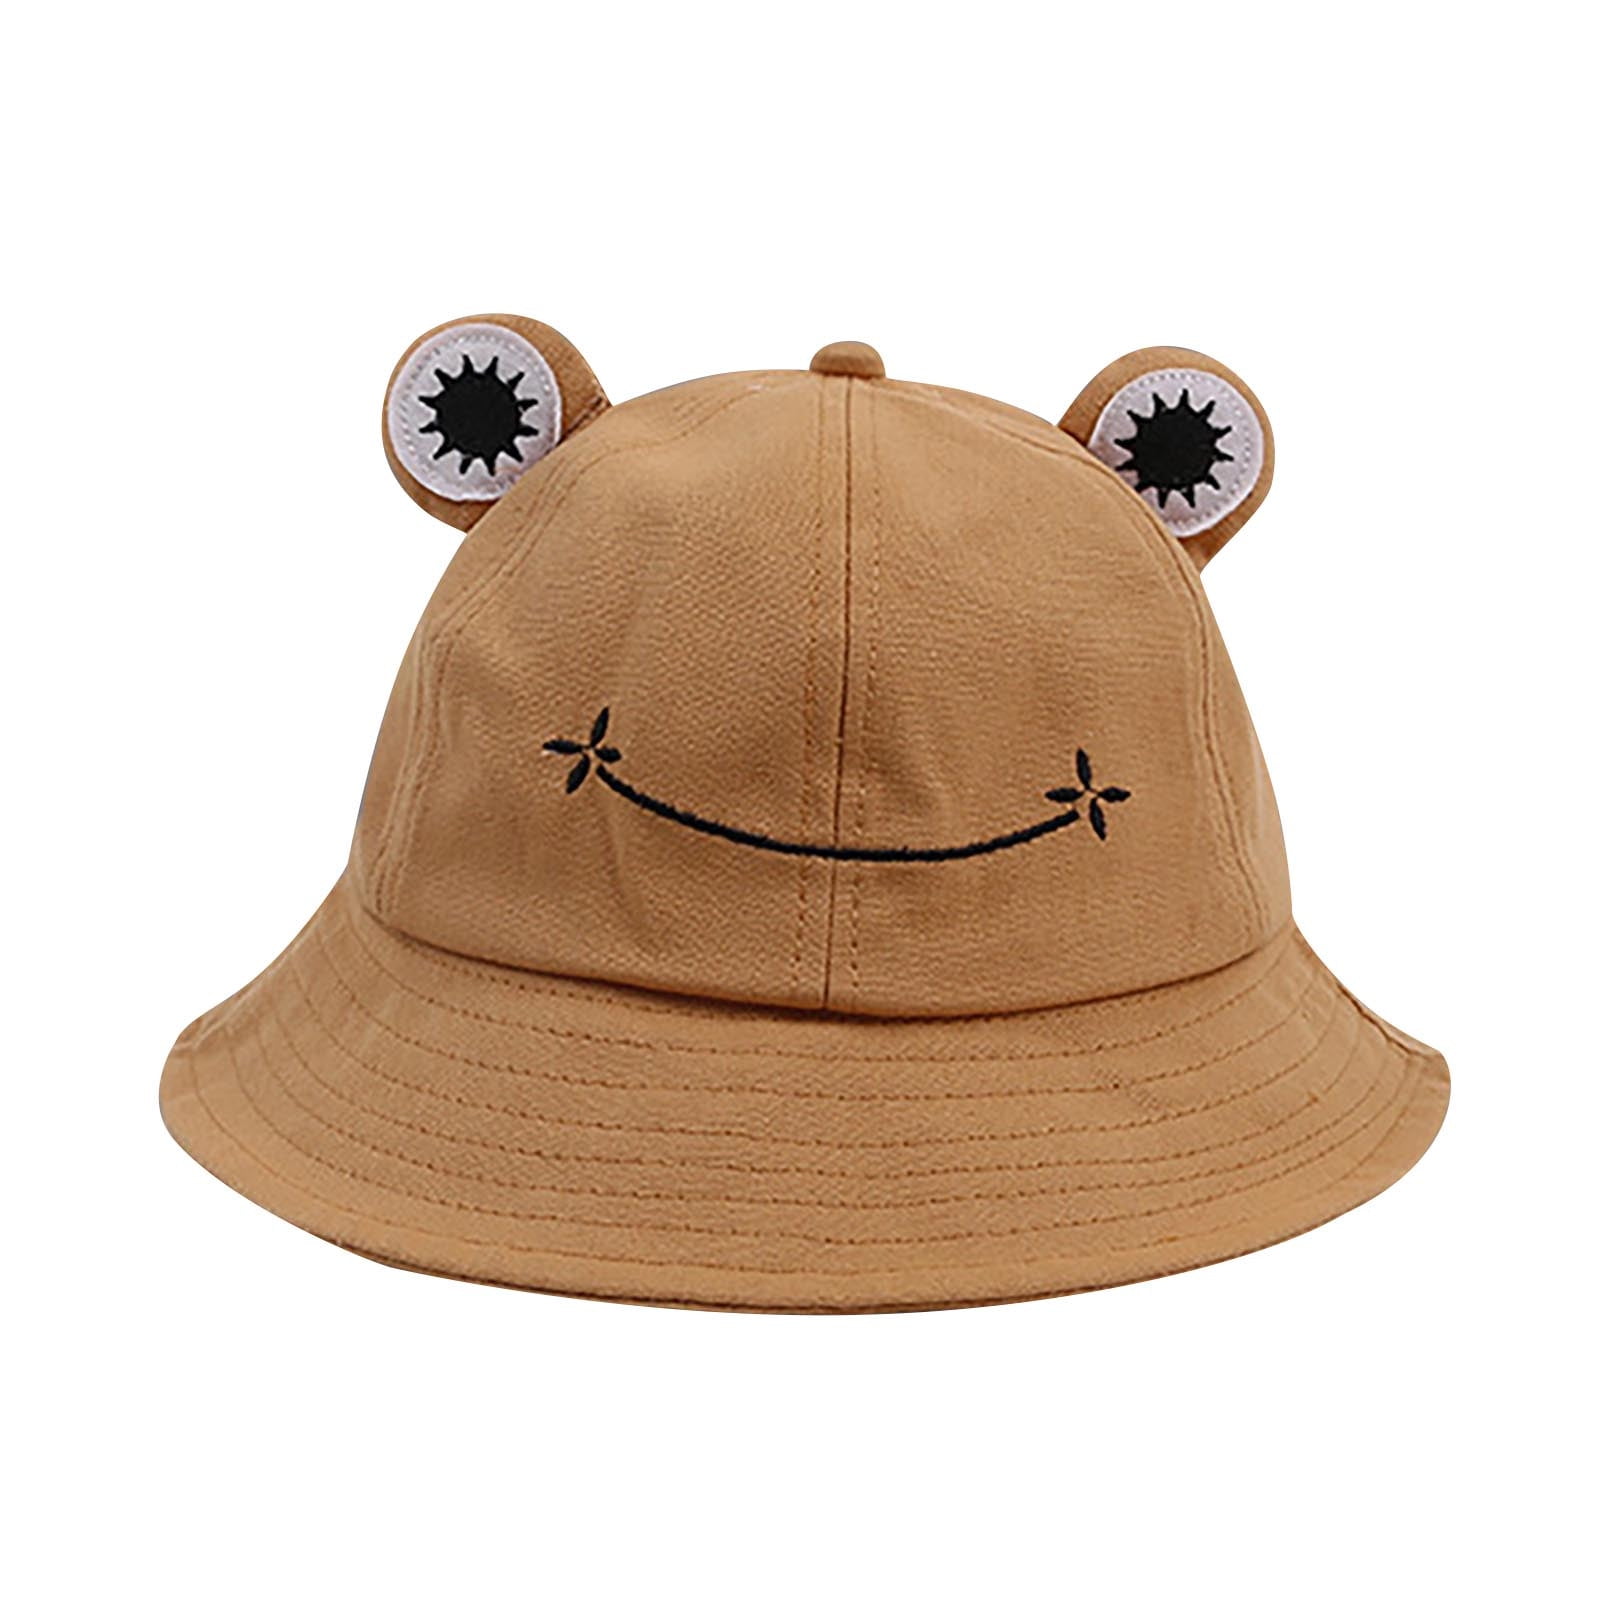 Lazy Funny Cat Summer Unisex Fishing Sun Top Bucket Hats for Kid Teens Women and Men with Packable Fisherman Cap for Outdoor Baseball Sport Picnic